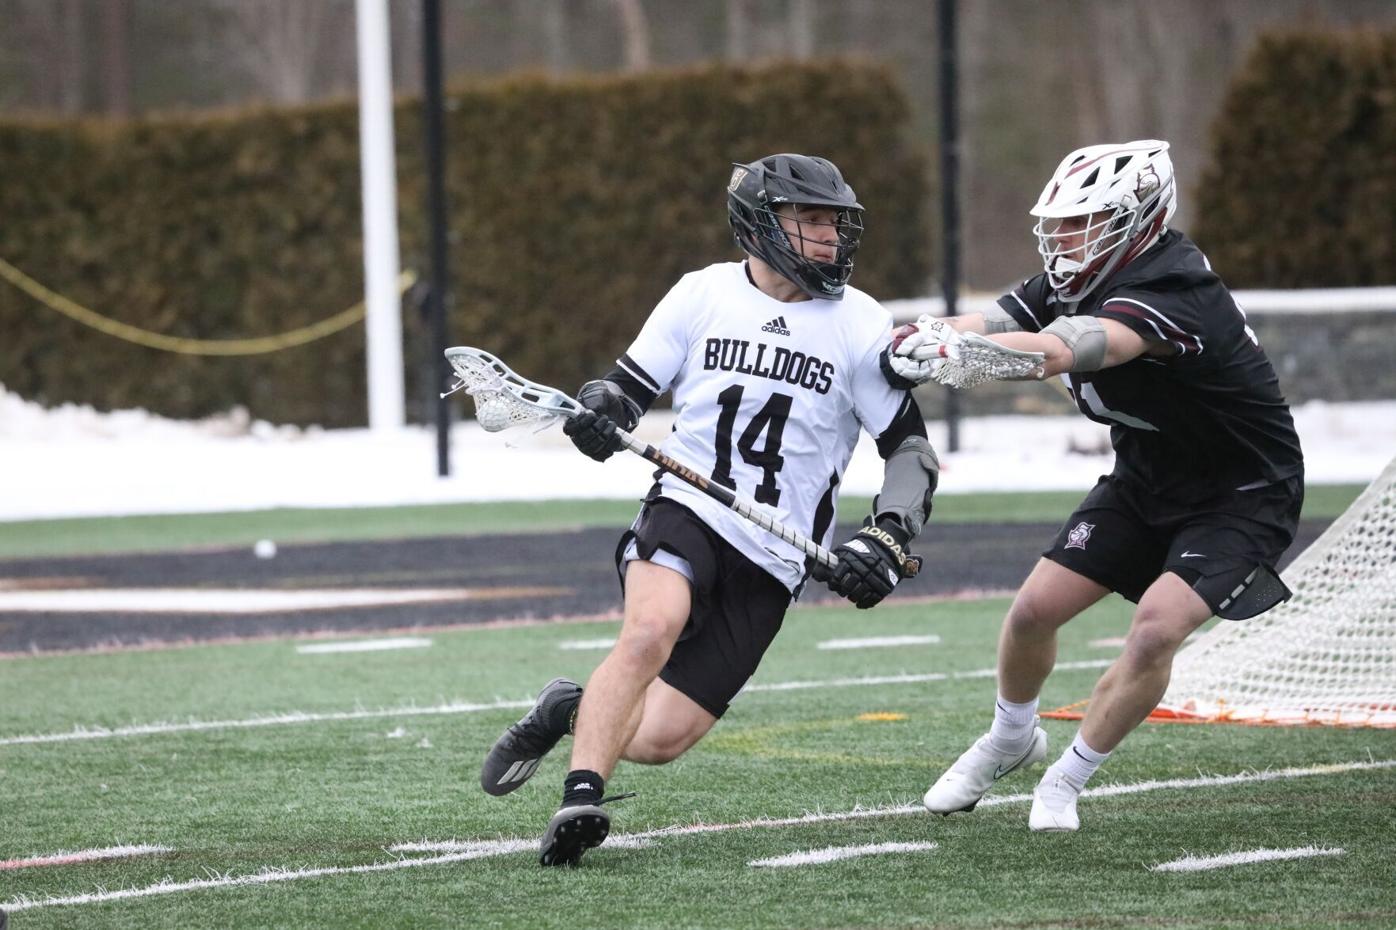 Londonderry's Abladian, a sophomore at Bryant, picking up where he left off  | College Sports 